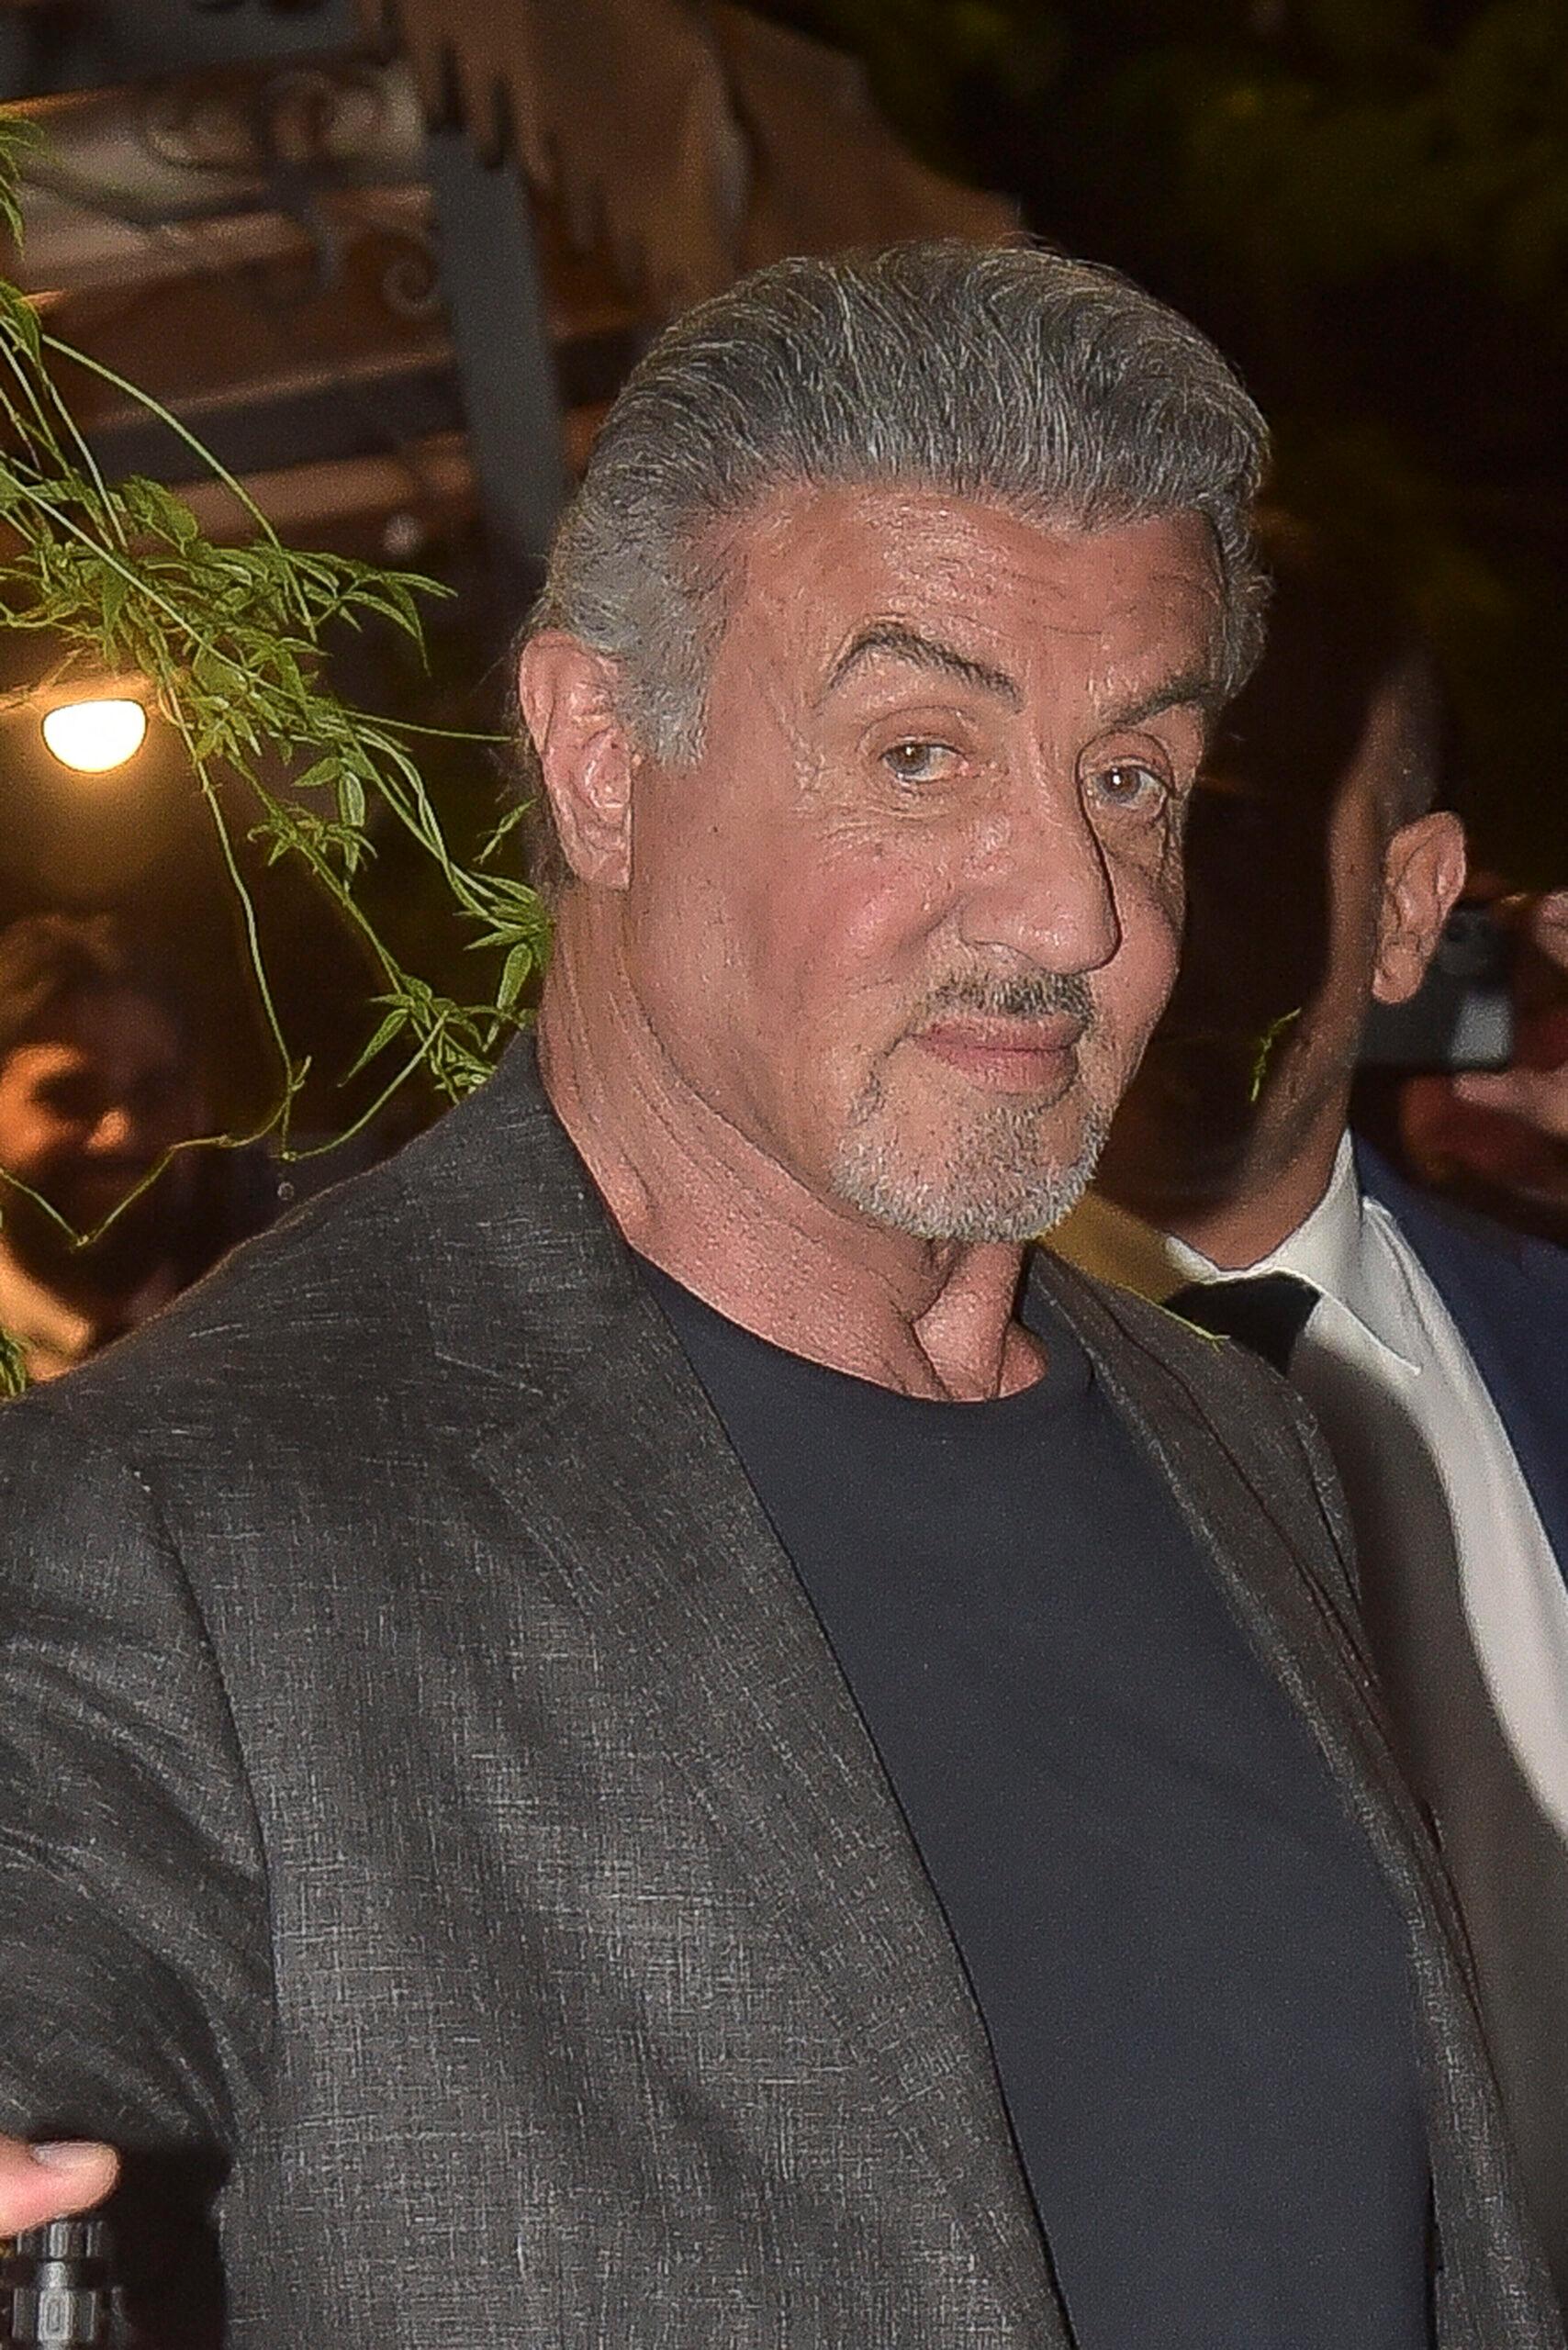 Sylvester Stallone dinner out in Rome